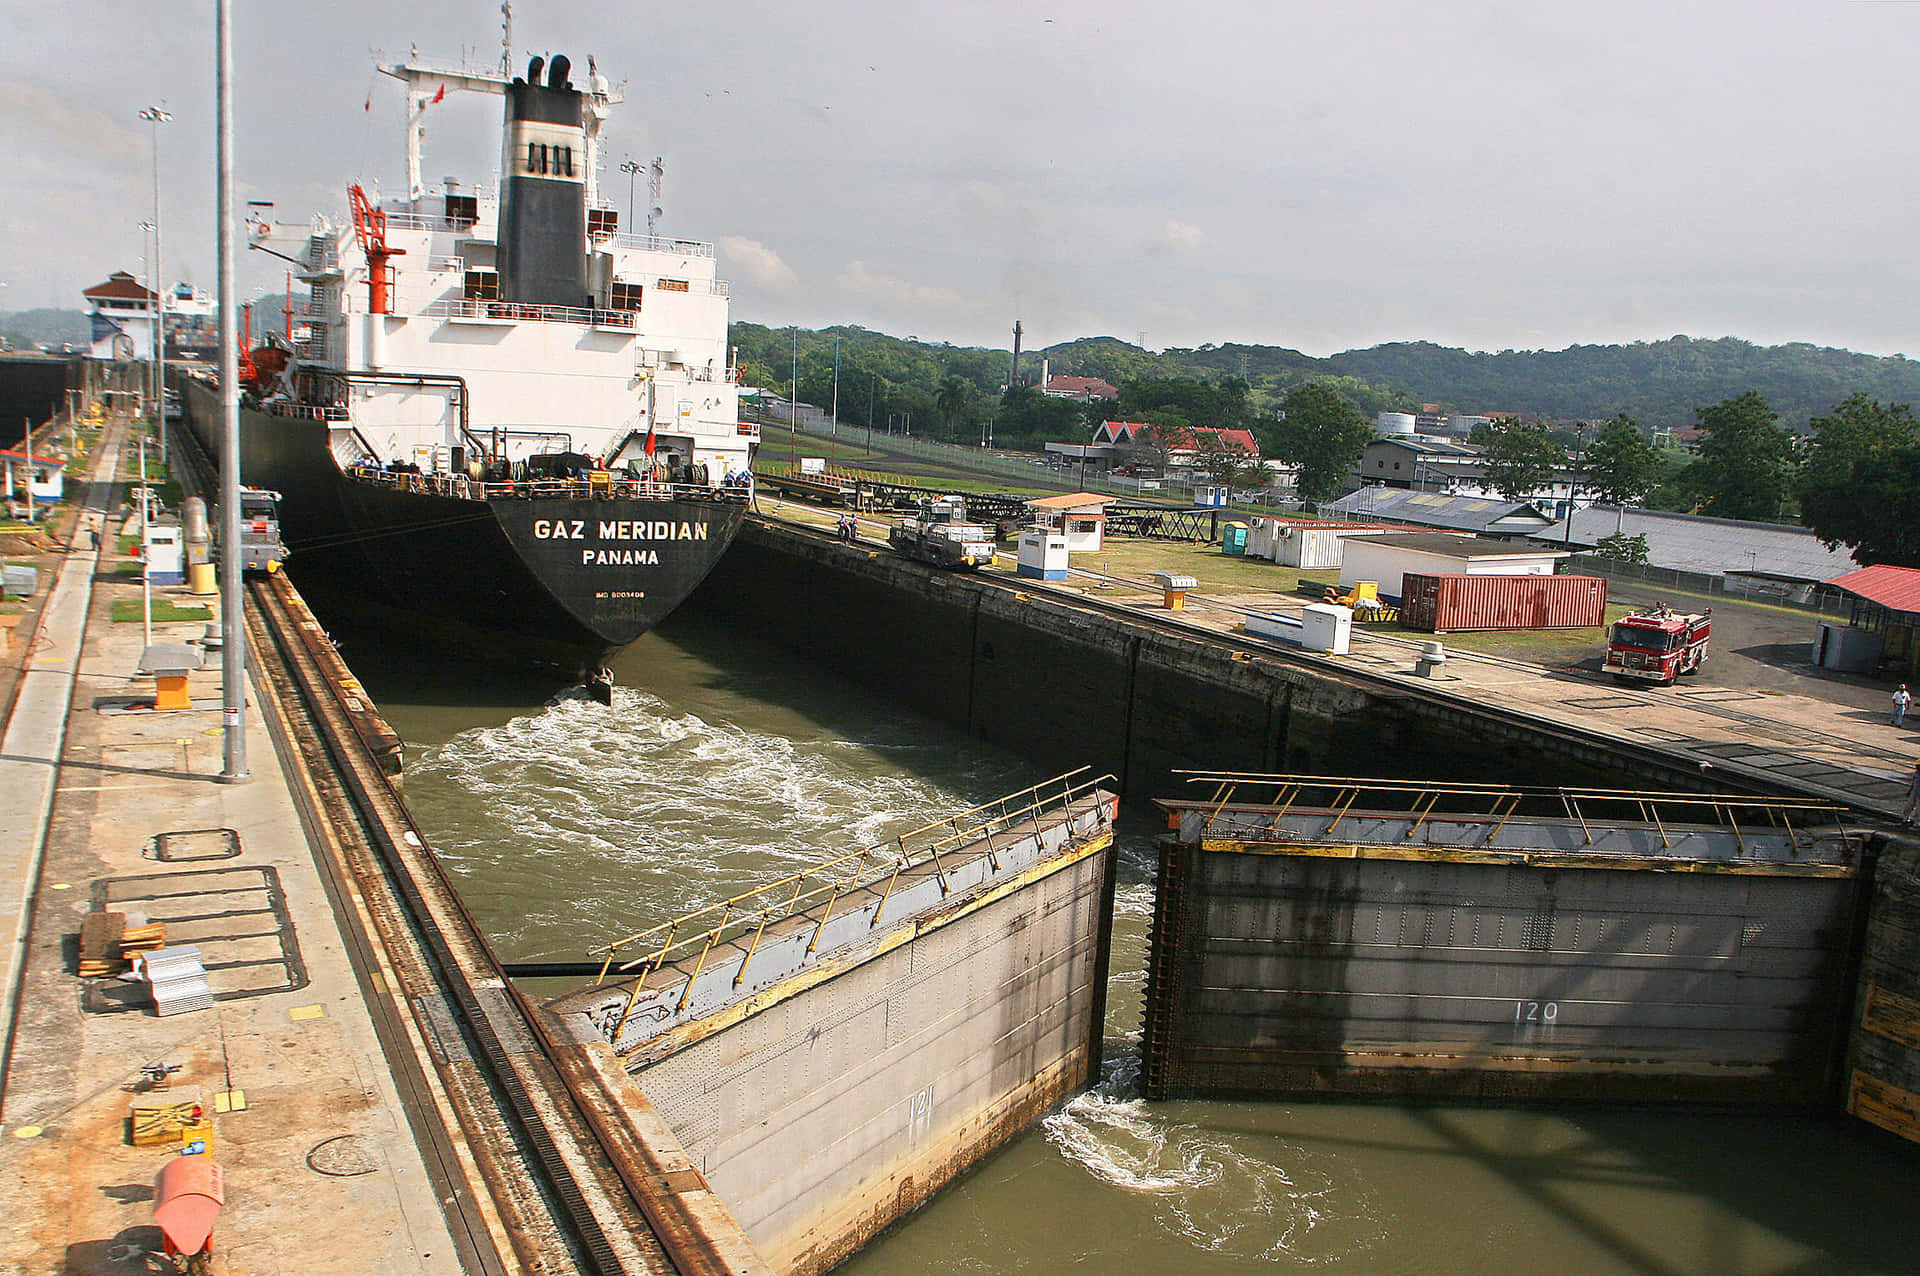 Black And White Ship Enter The Panama Canal Wallpaper